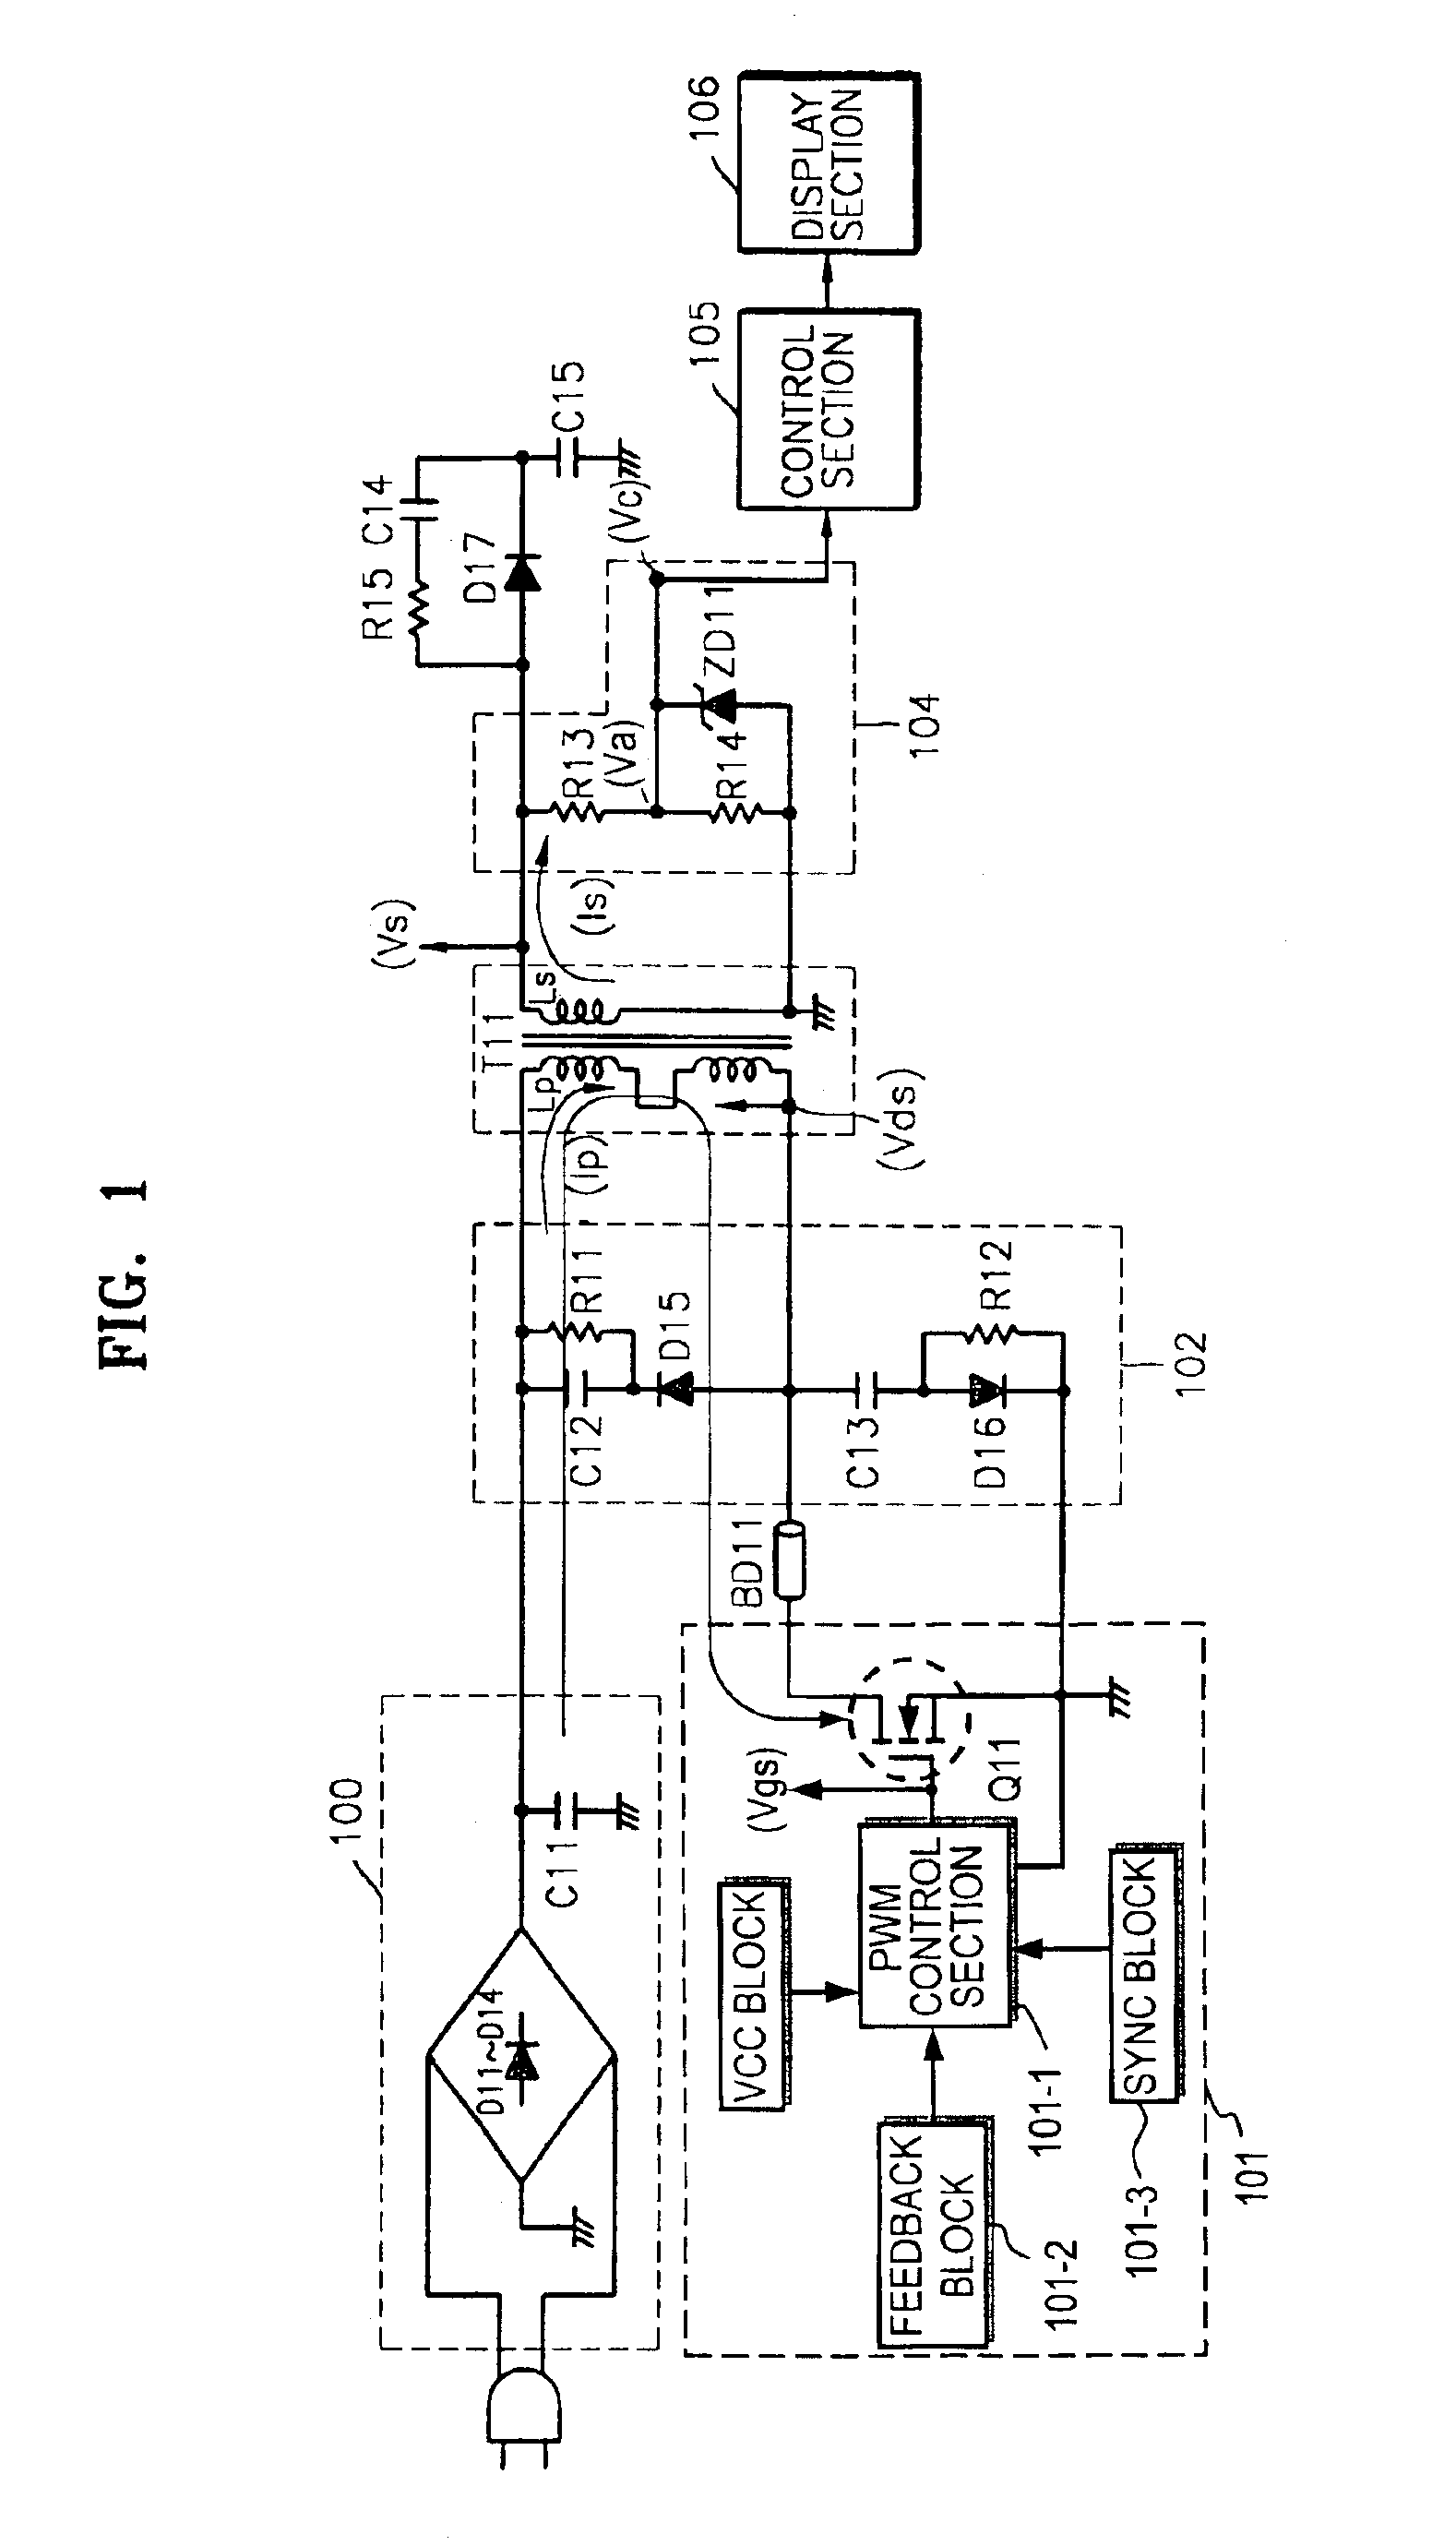 Apparatus for and method of measuring power consumption